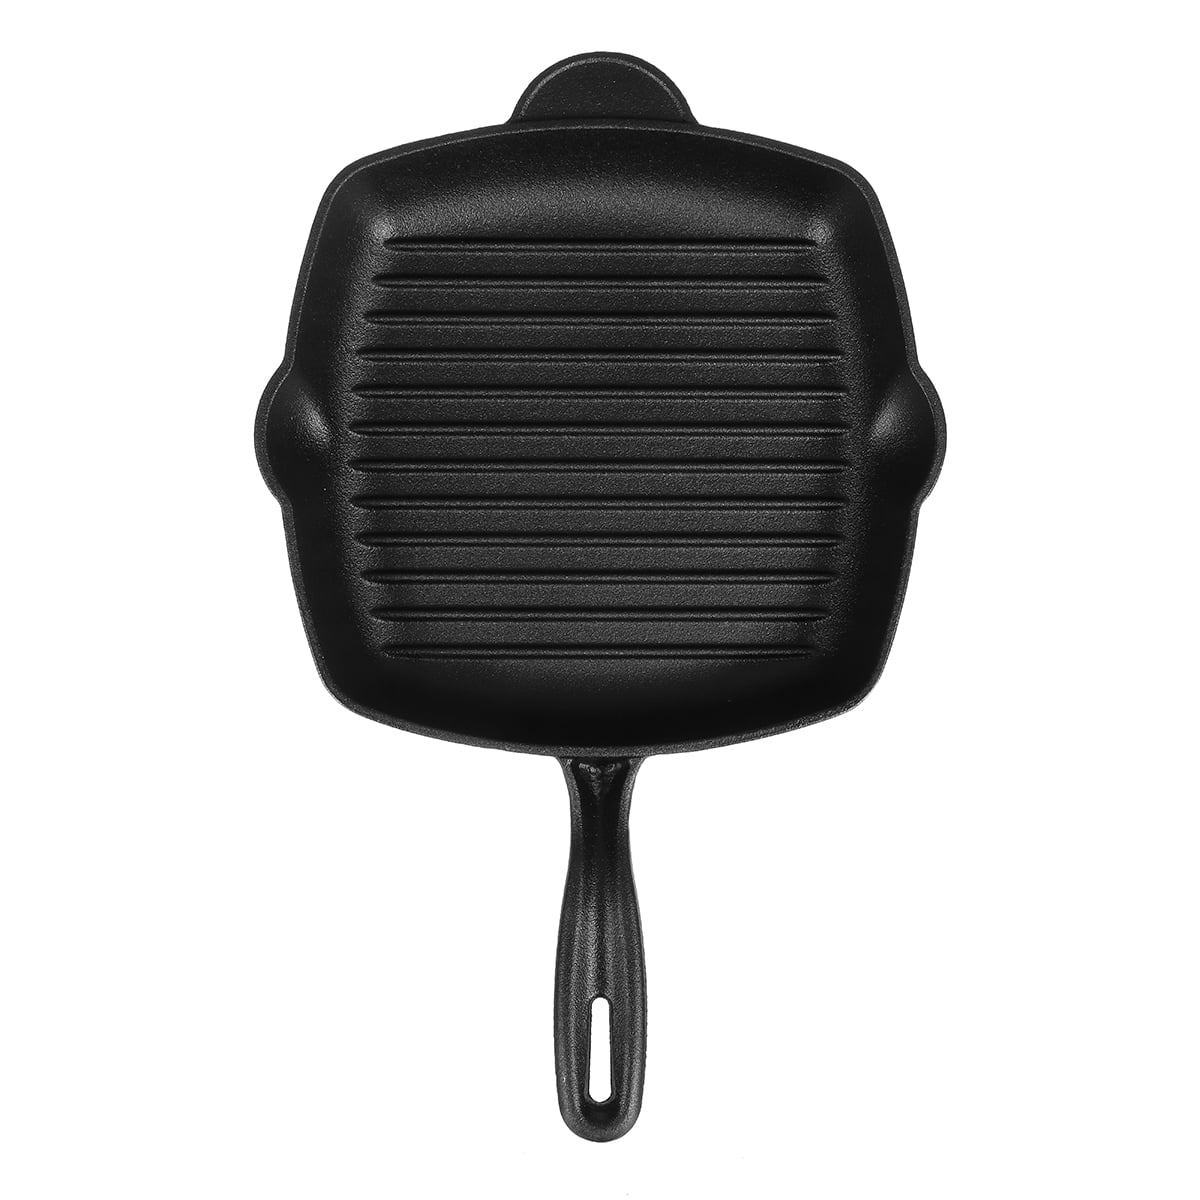 Ovente Square Cast Iron Grill Pan 10 inch with Pre-Seasoned Non Stick Griddle and Grip Handle, Easy Clean Stovetop Cookware, Black CWC2307001B